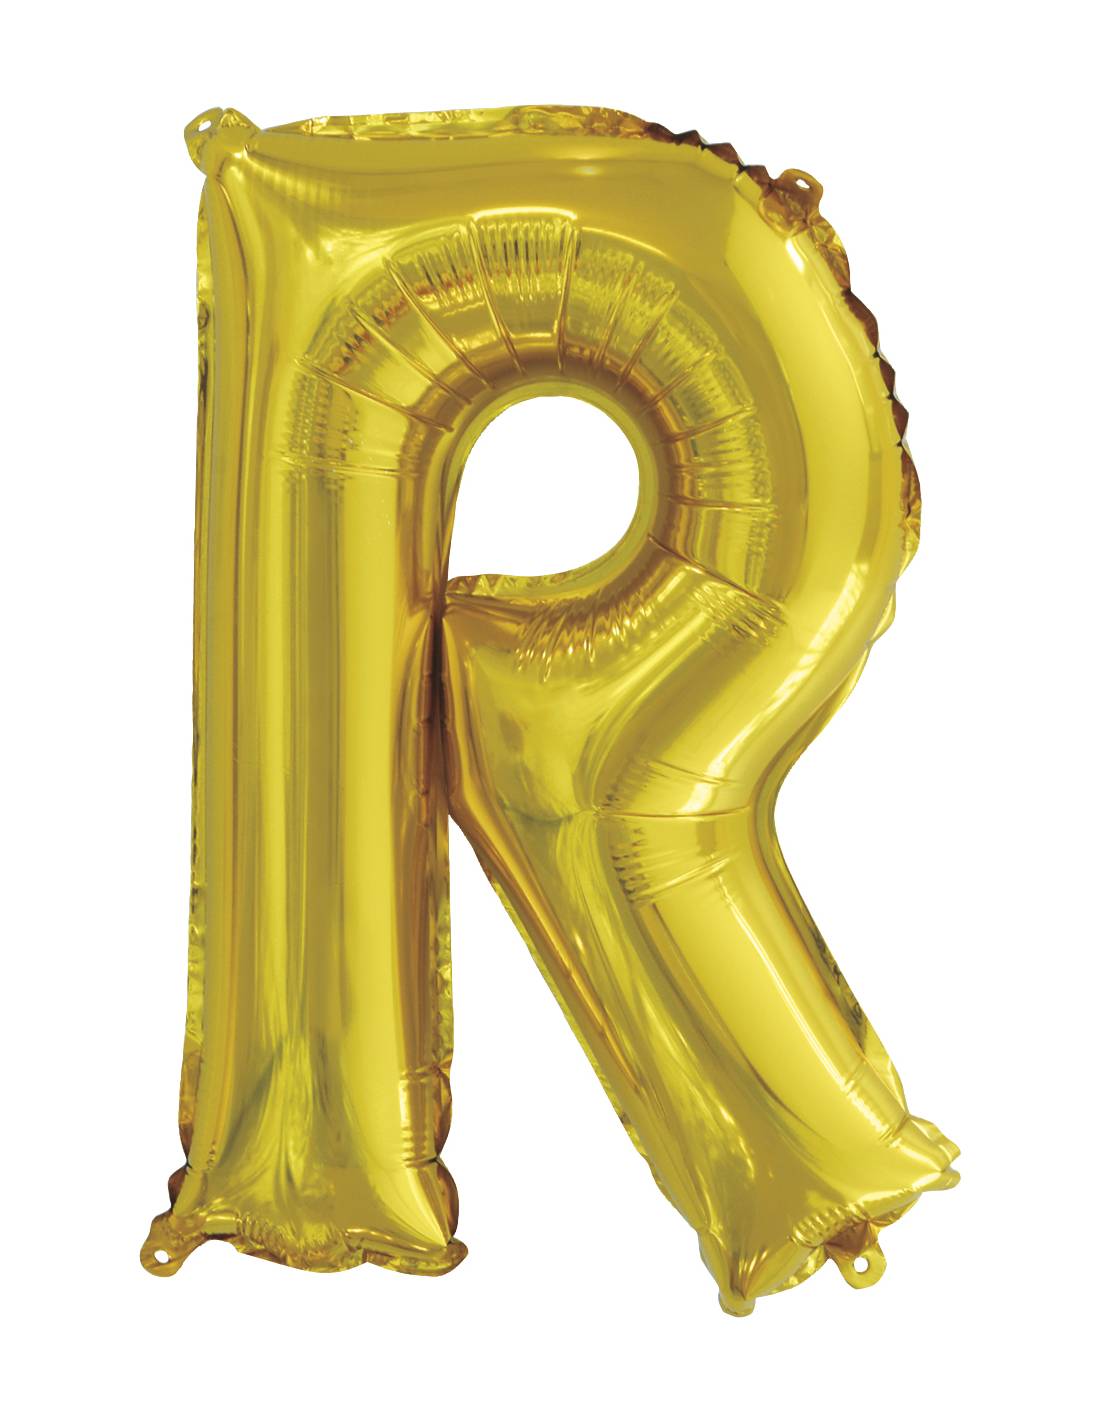 “R” Gold letter air filled balloon